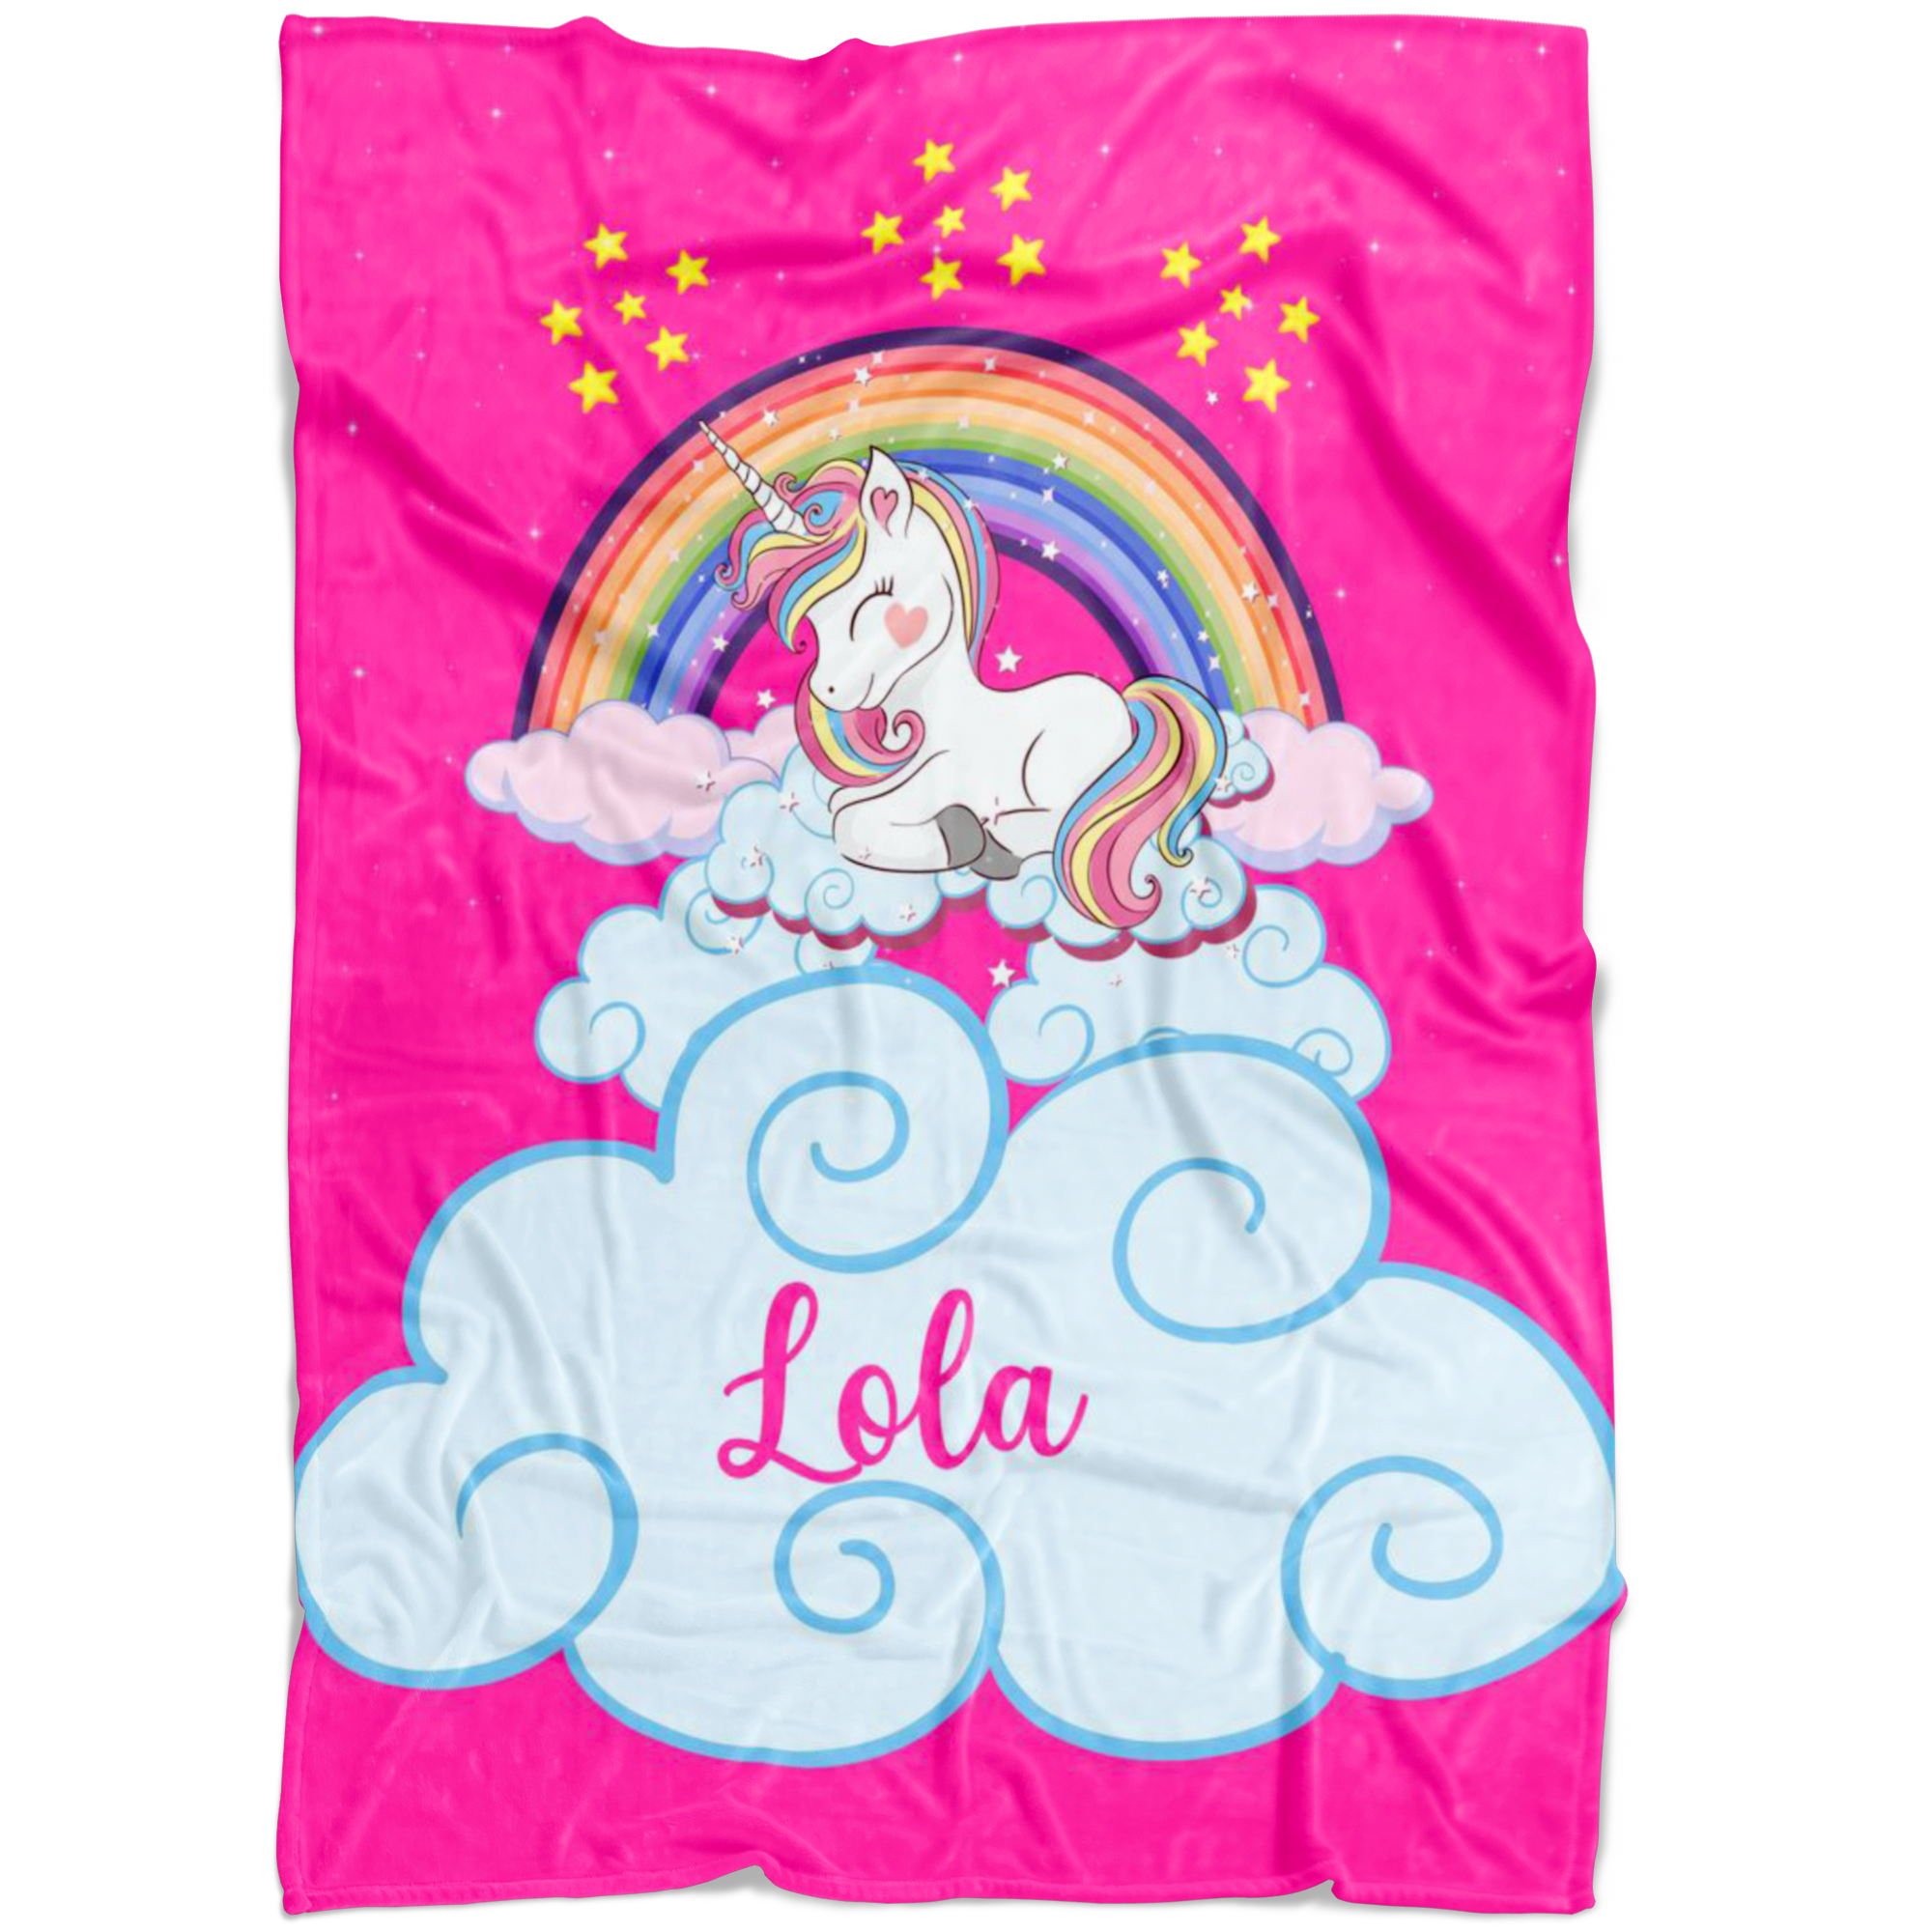 Personalized Name Magical Unicorn Blanket for Babies & Girls - Lola